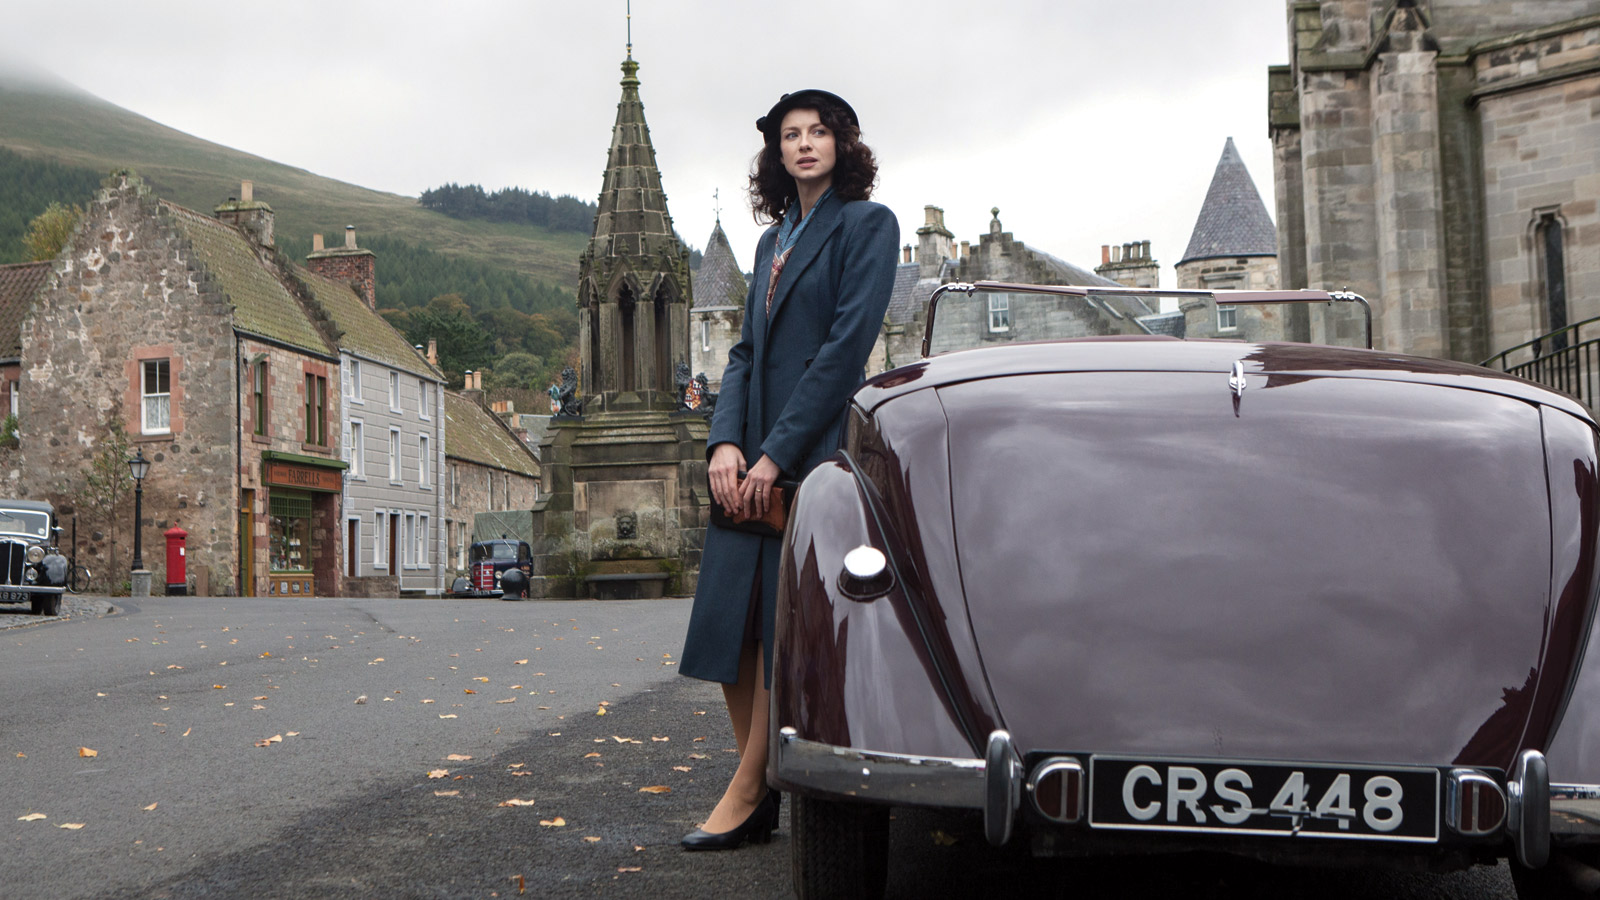 Outlander - Catriona Balfe stands wearing 1940s clothing leaning against a car in a small town